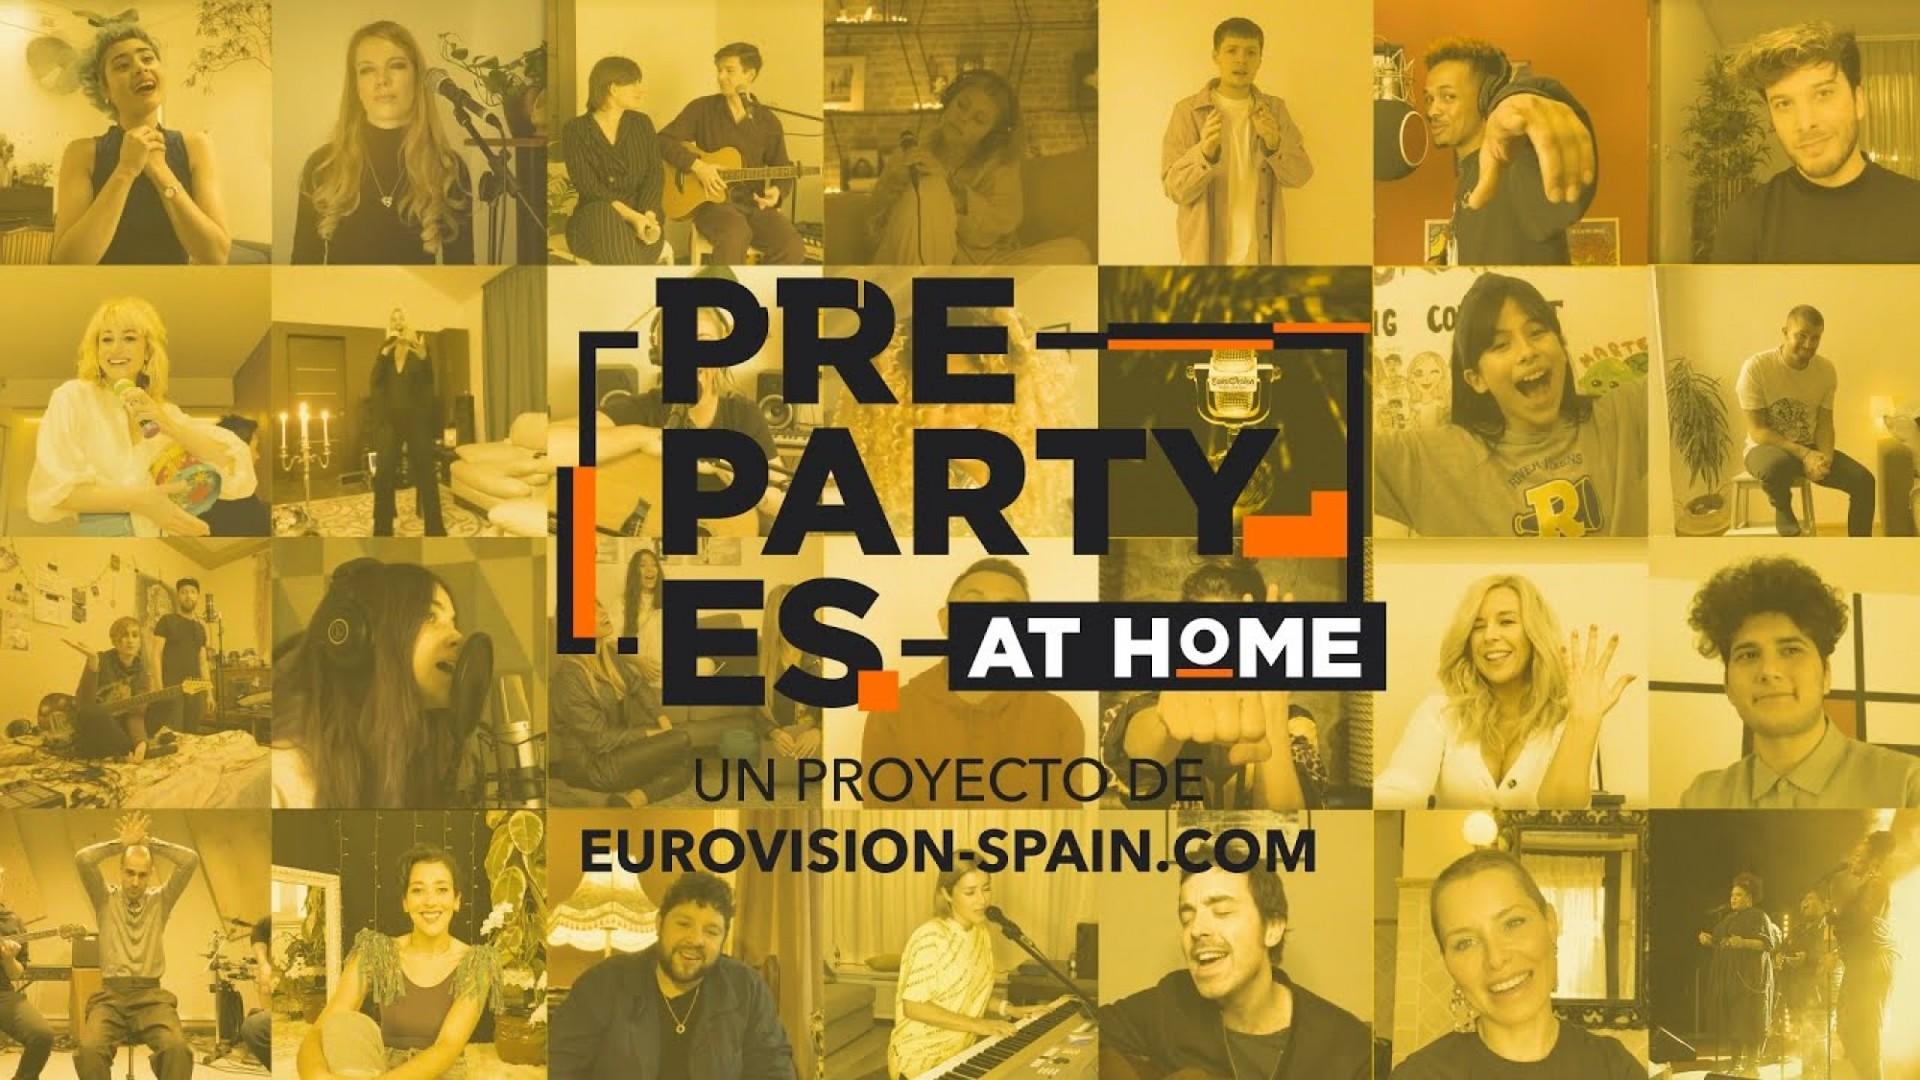 Eurovision Spain Pre-Party at Home 2020